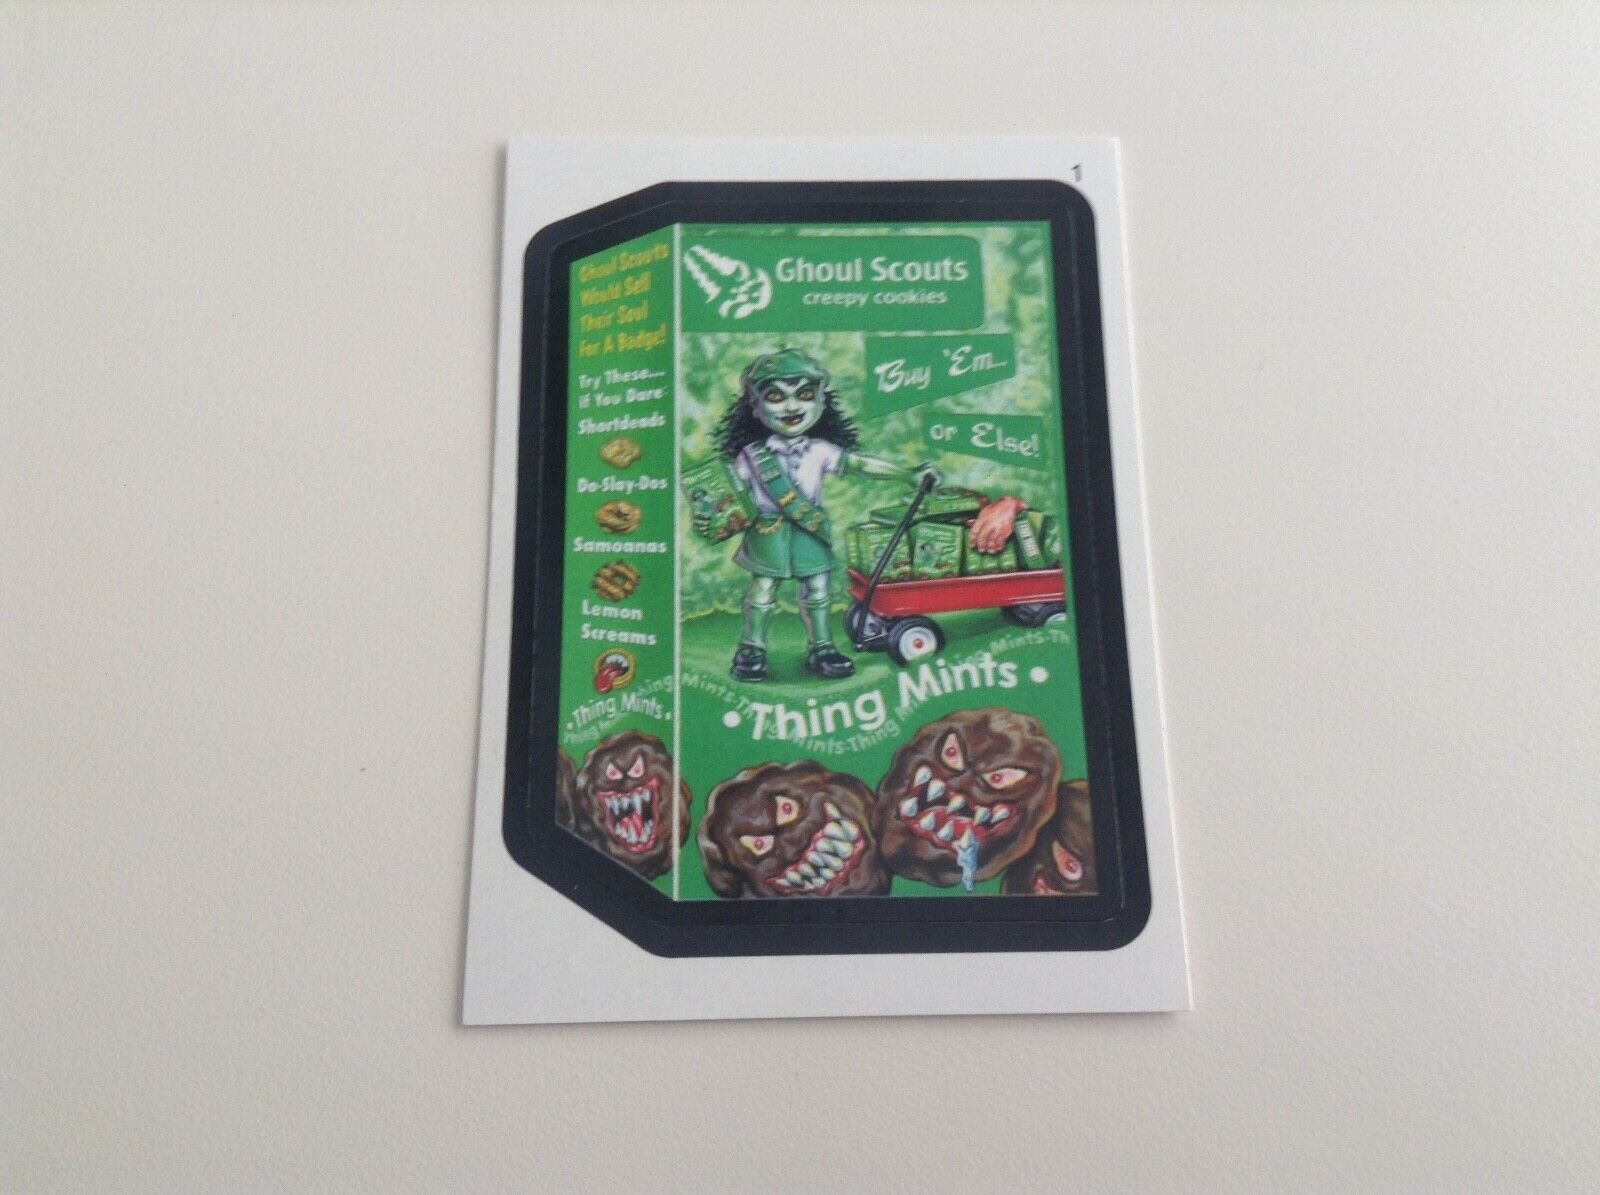 GIRL SCOUTS 2010 TOPPS WACKY PACKAGES CARD PARODY, GHOUL SCOUTS THING MINTS #1